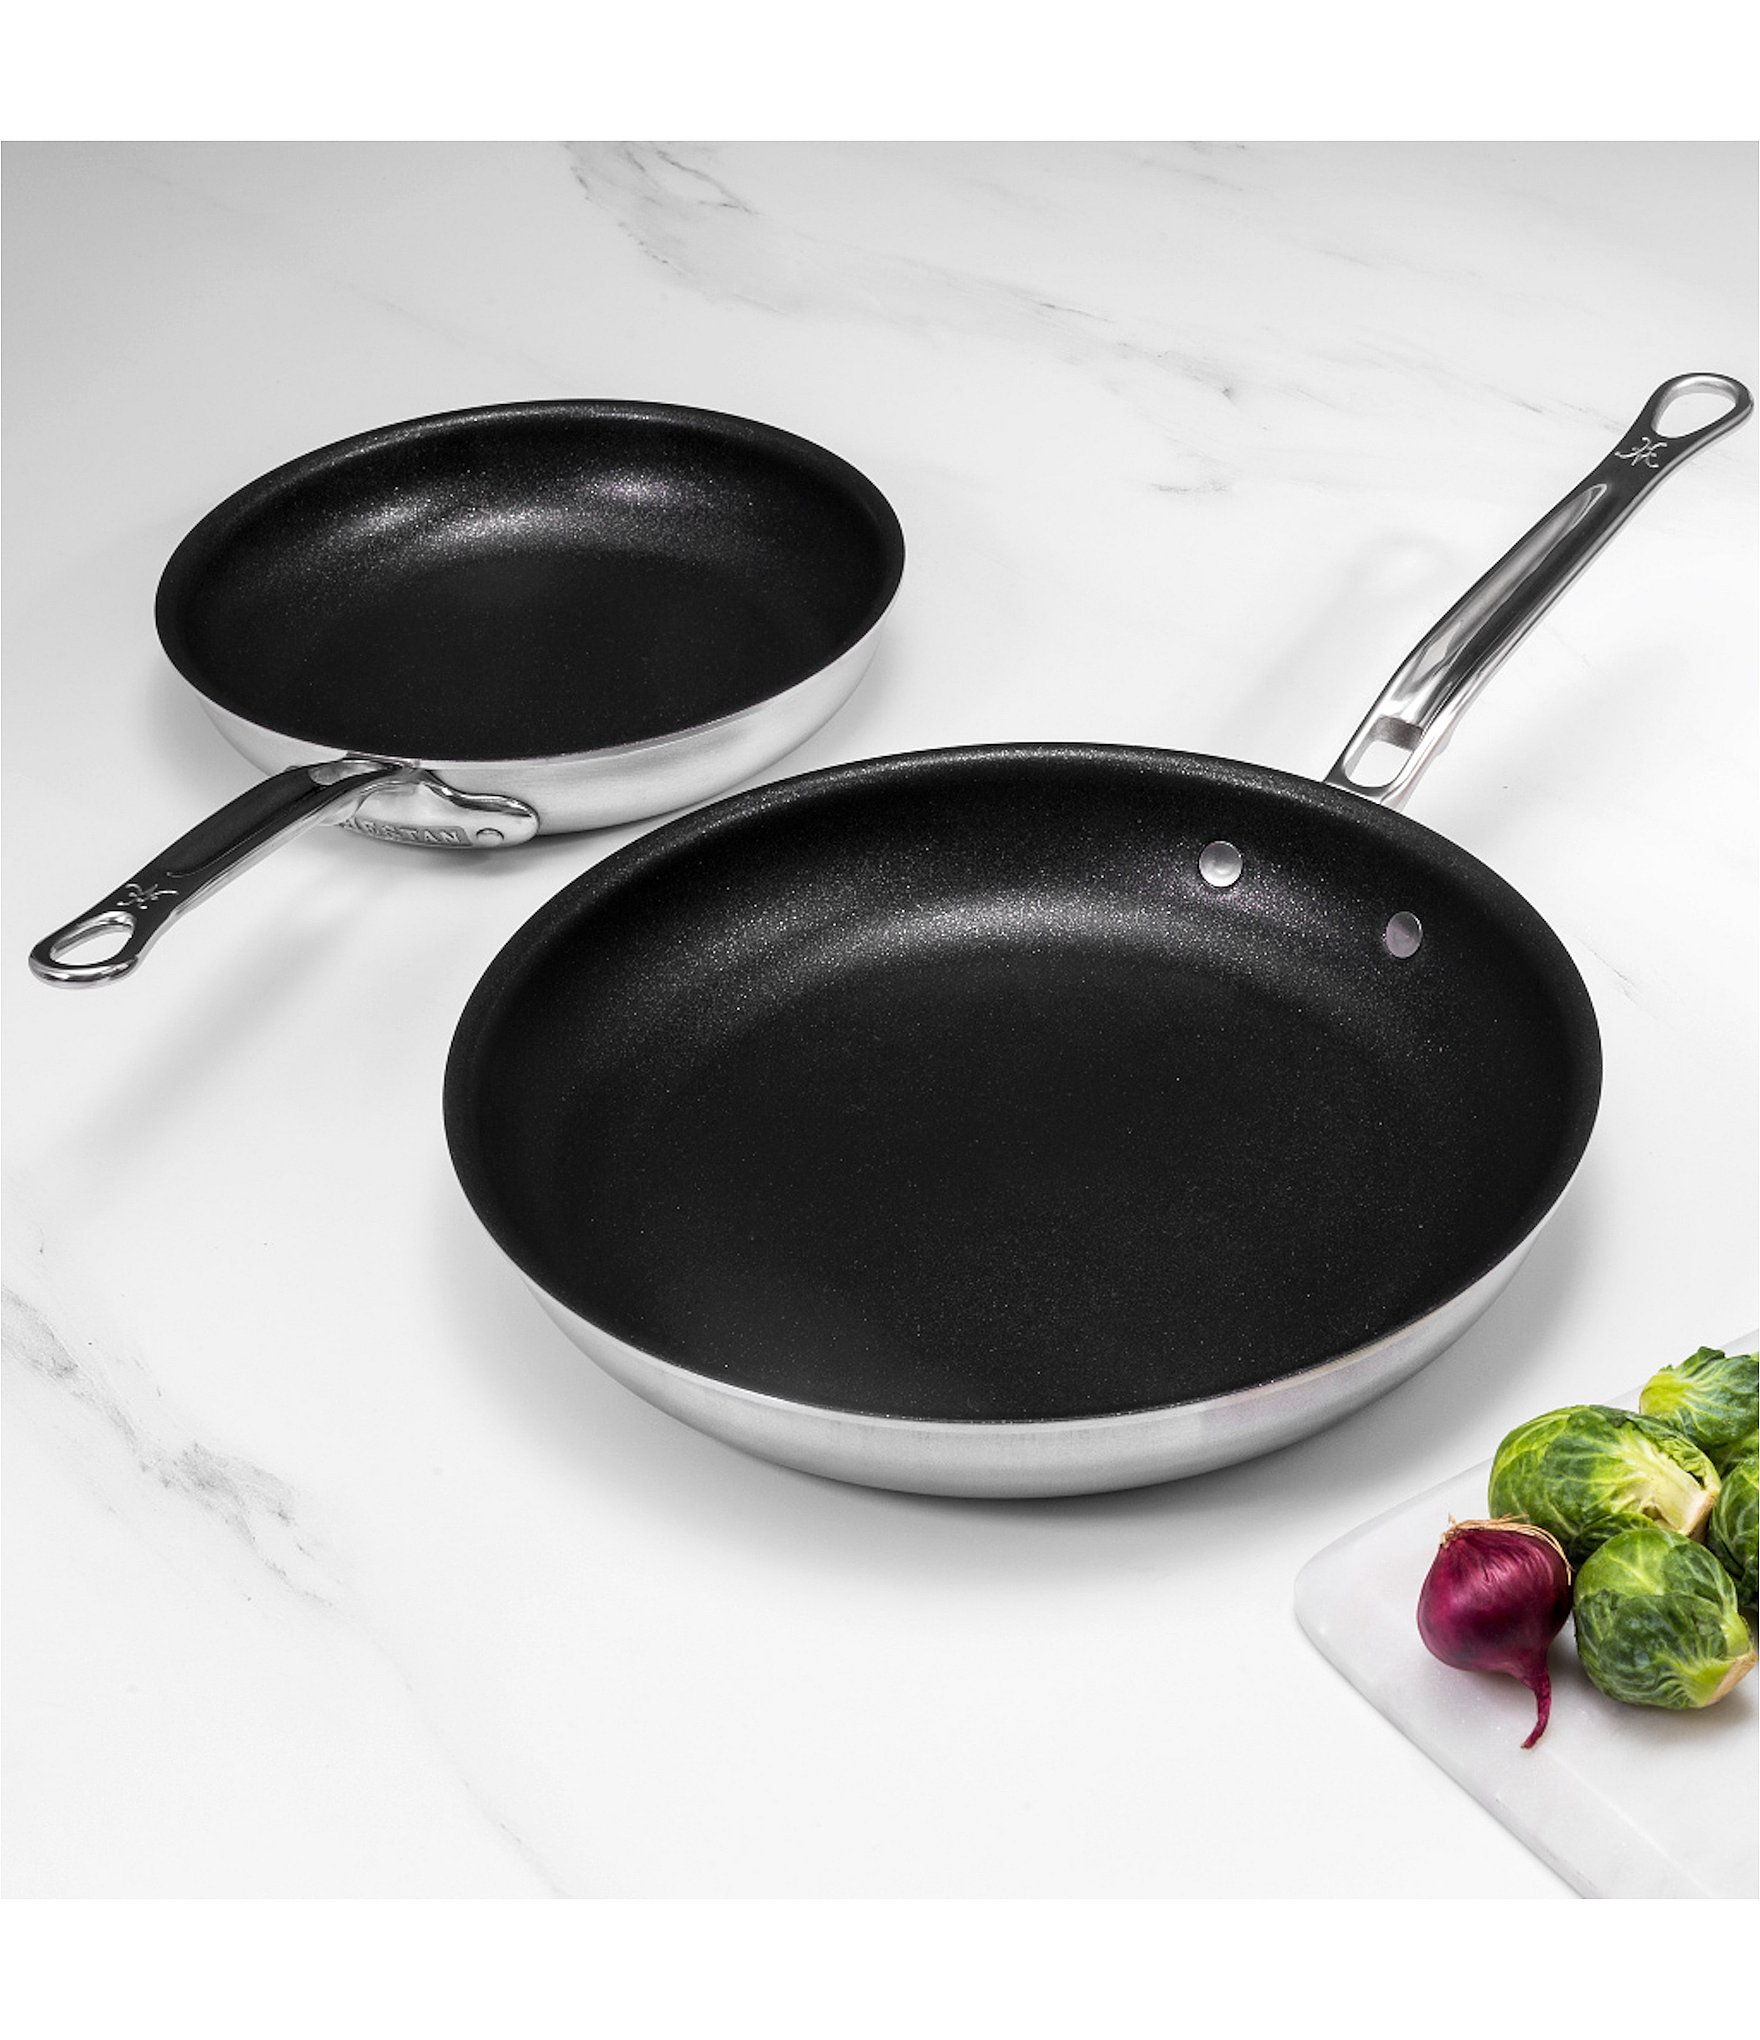 https://dimg.dillards.com/is/image/DillardsZoom/zoom/hestan-thomas-keller-insignia-tri-ply-stainless-steel-set-of-two--open-saute-pan-with-titum-nonstick-system/20247189_zi.jpg